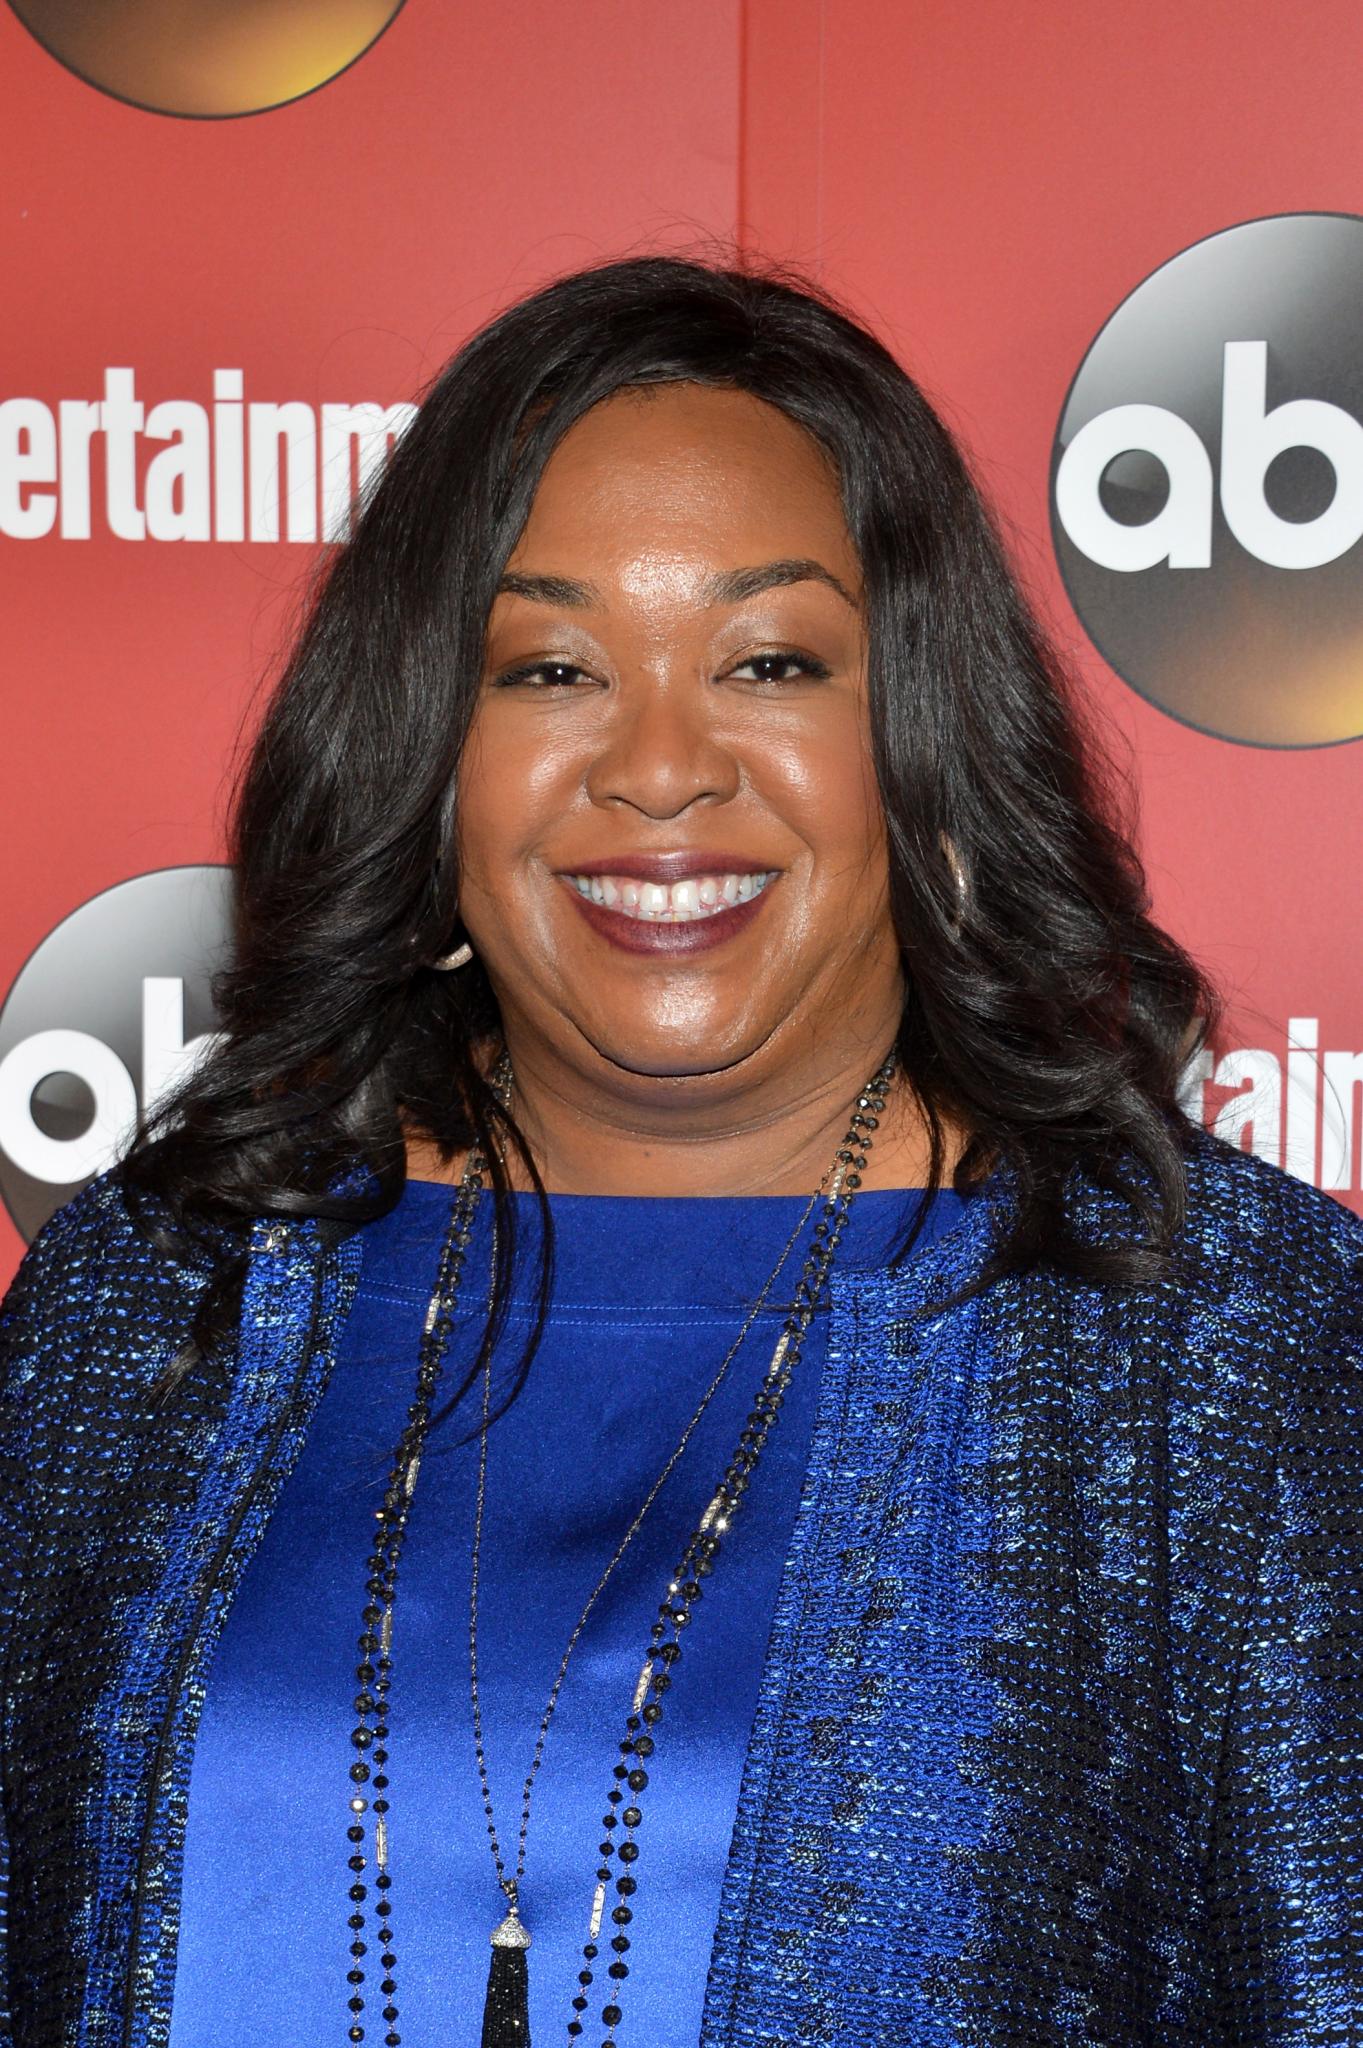 See Shonda Rhimes' Brilliant Response to Being Called An 'Angry Black Woman'
